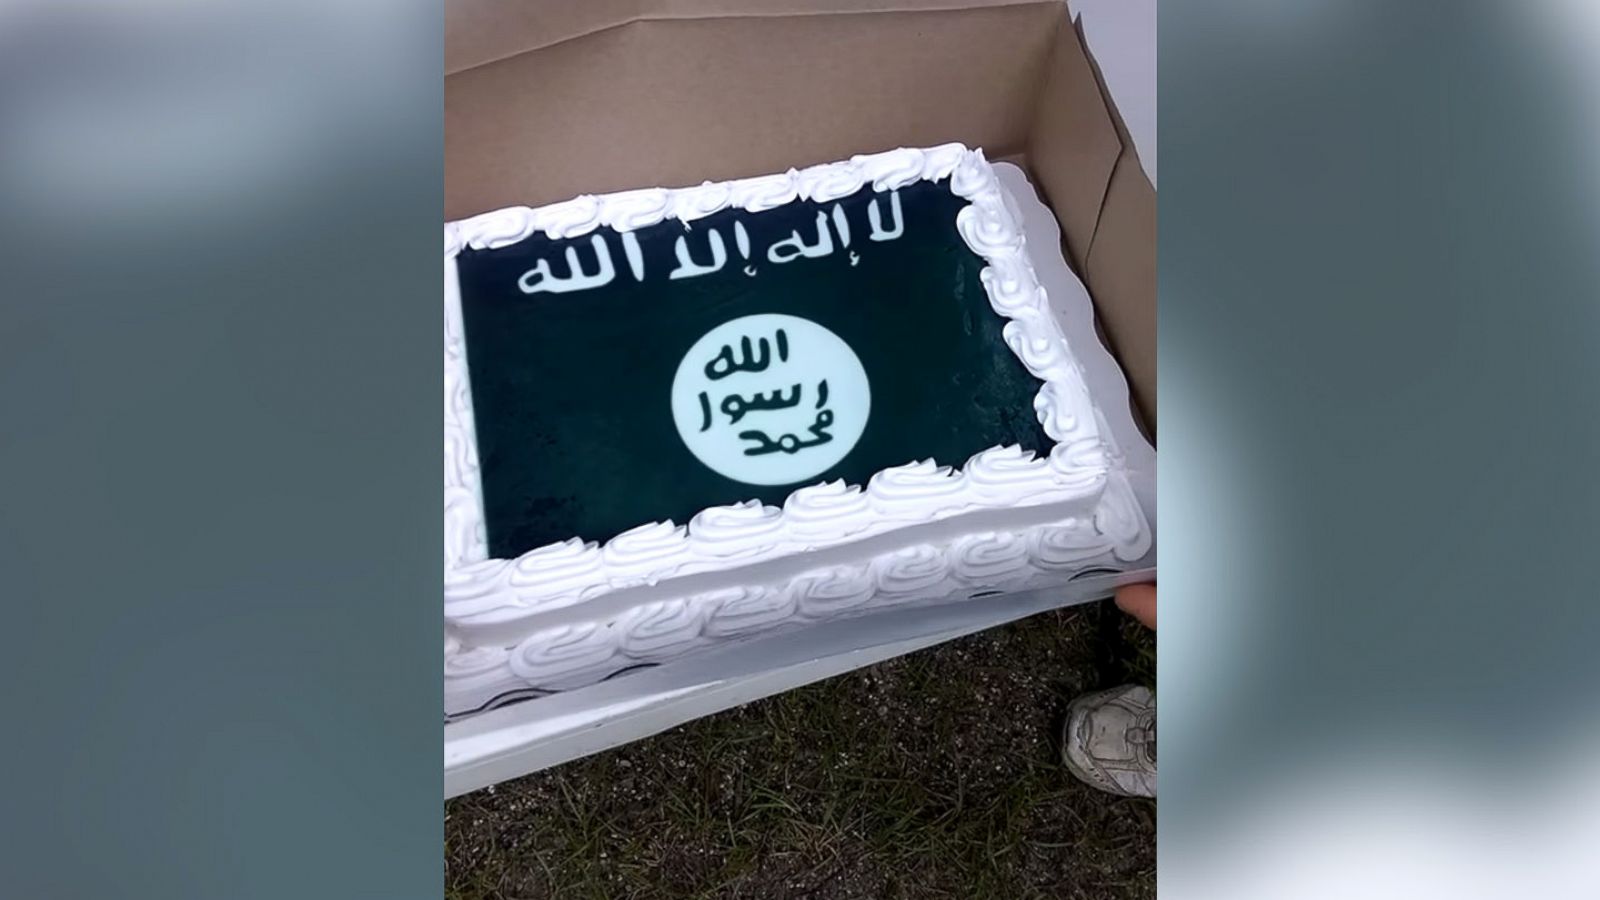 Walmart Apologizes For Making Isis Cake For Man Denied Confederate Flag Design Abc News,Indian Style Very Small Kitchen Kitchen Entrance Arch Design